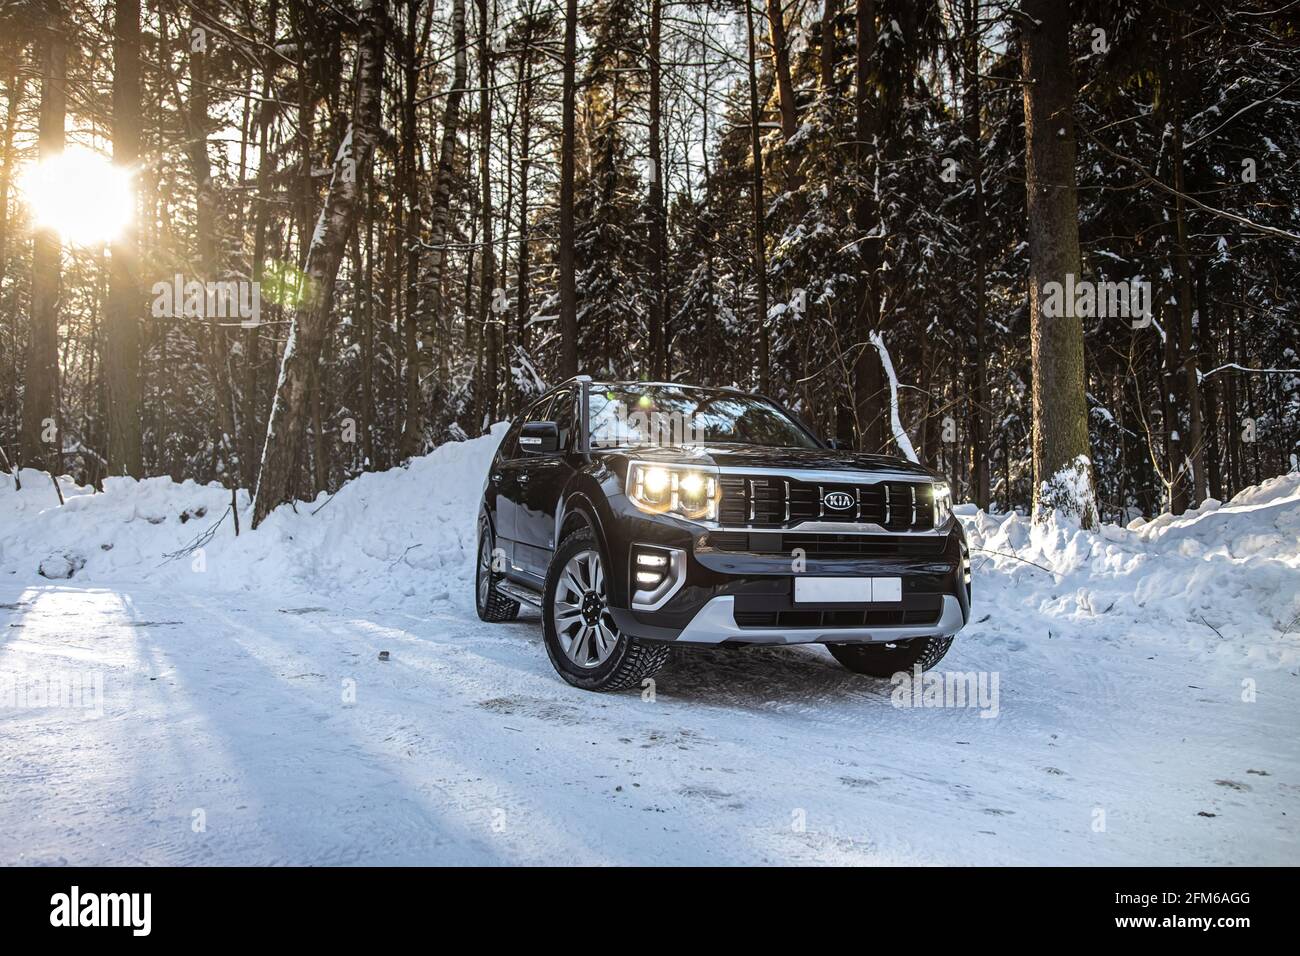 Moscow, Russia - February 15, 2021: Kia Mohave 2021 black SUV parked in the forest in winter. General shot of the car from the front. Controlled skidding in snowdrifts. Stock Photo